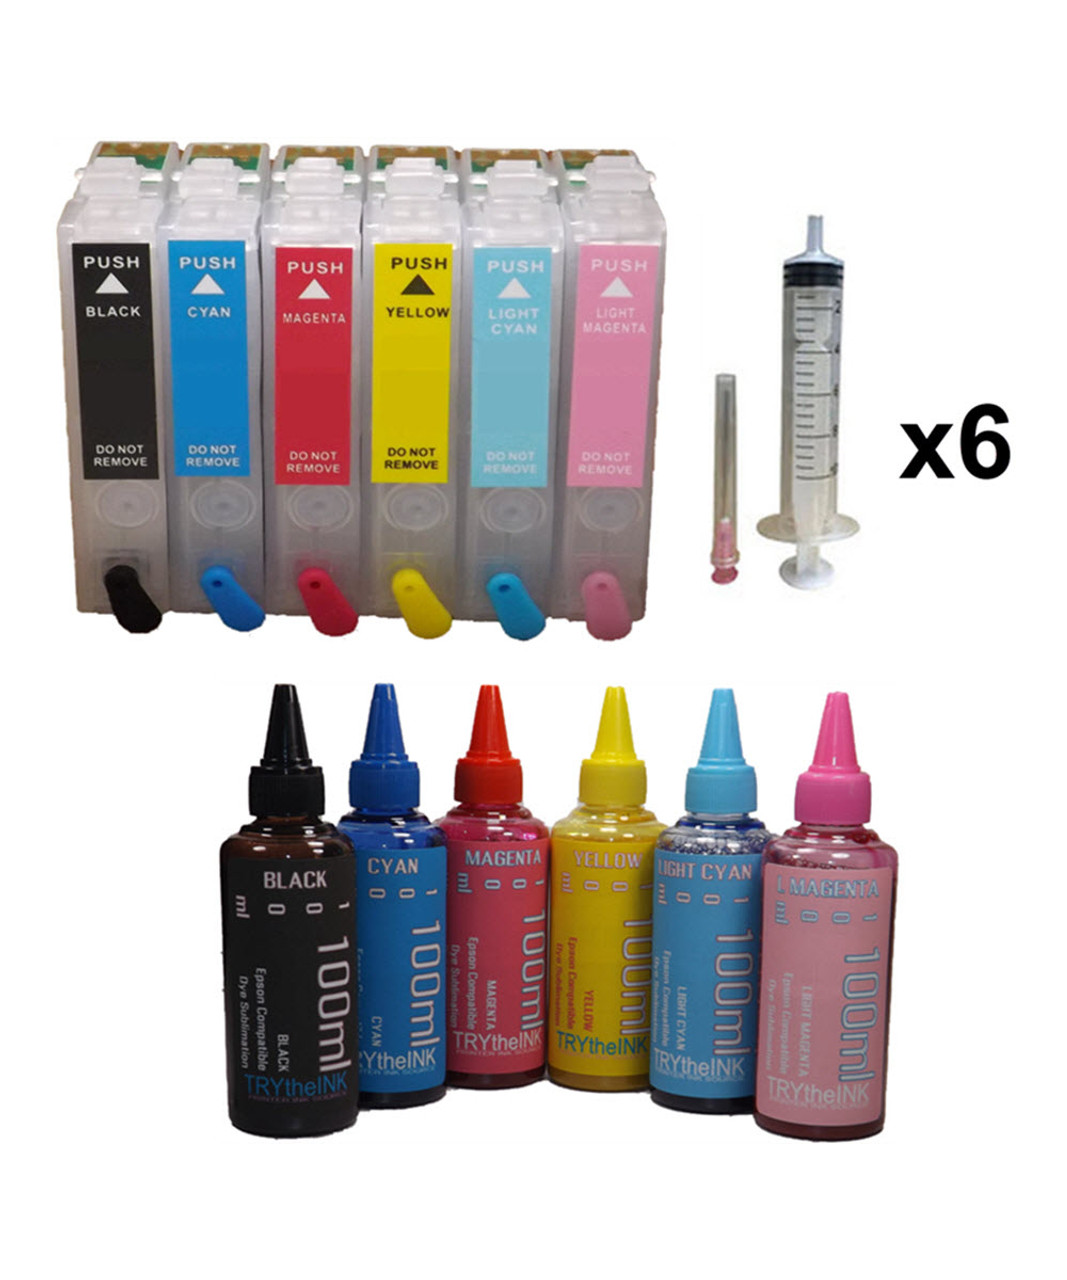 6- Dye Sublimation Ink 100ml Bottles 6- Refillable Ink Cartridges for Epson Stylus Photo R260 R280 R380 RX580 RX595 RX680 printers